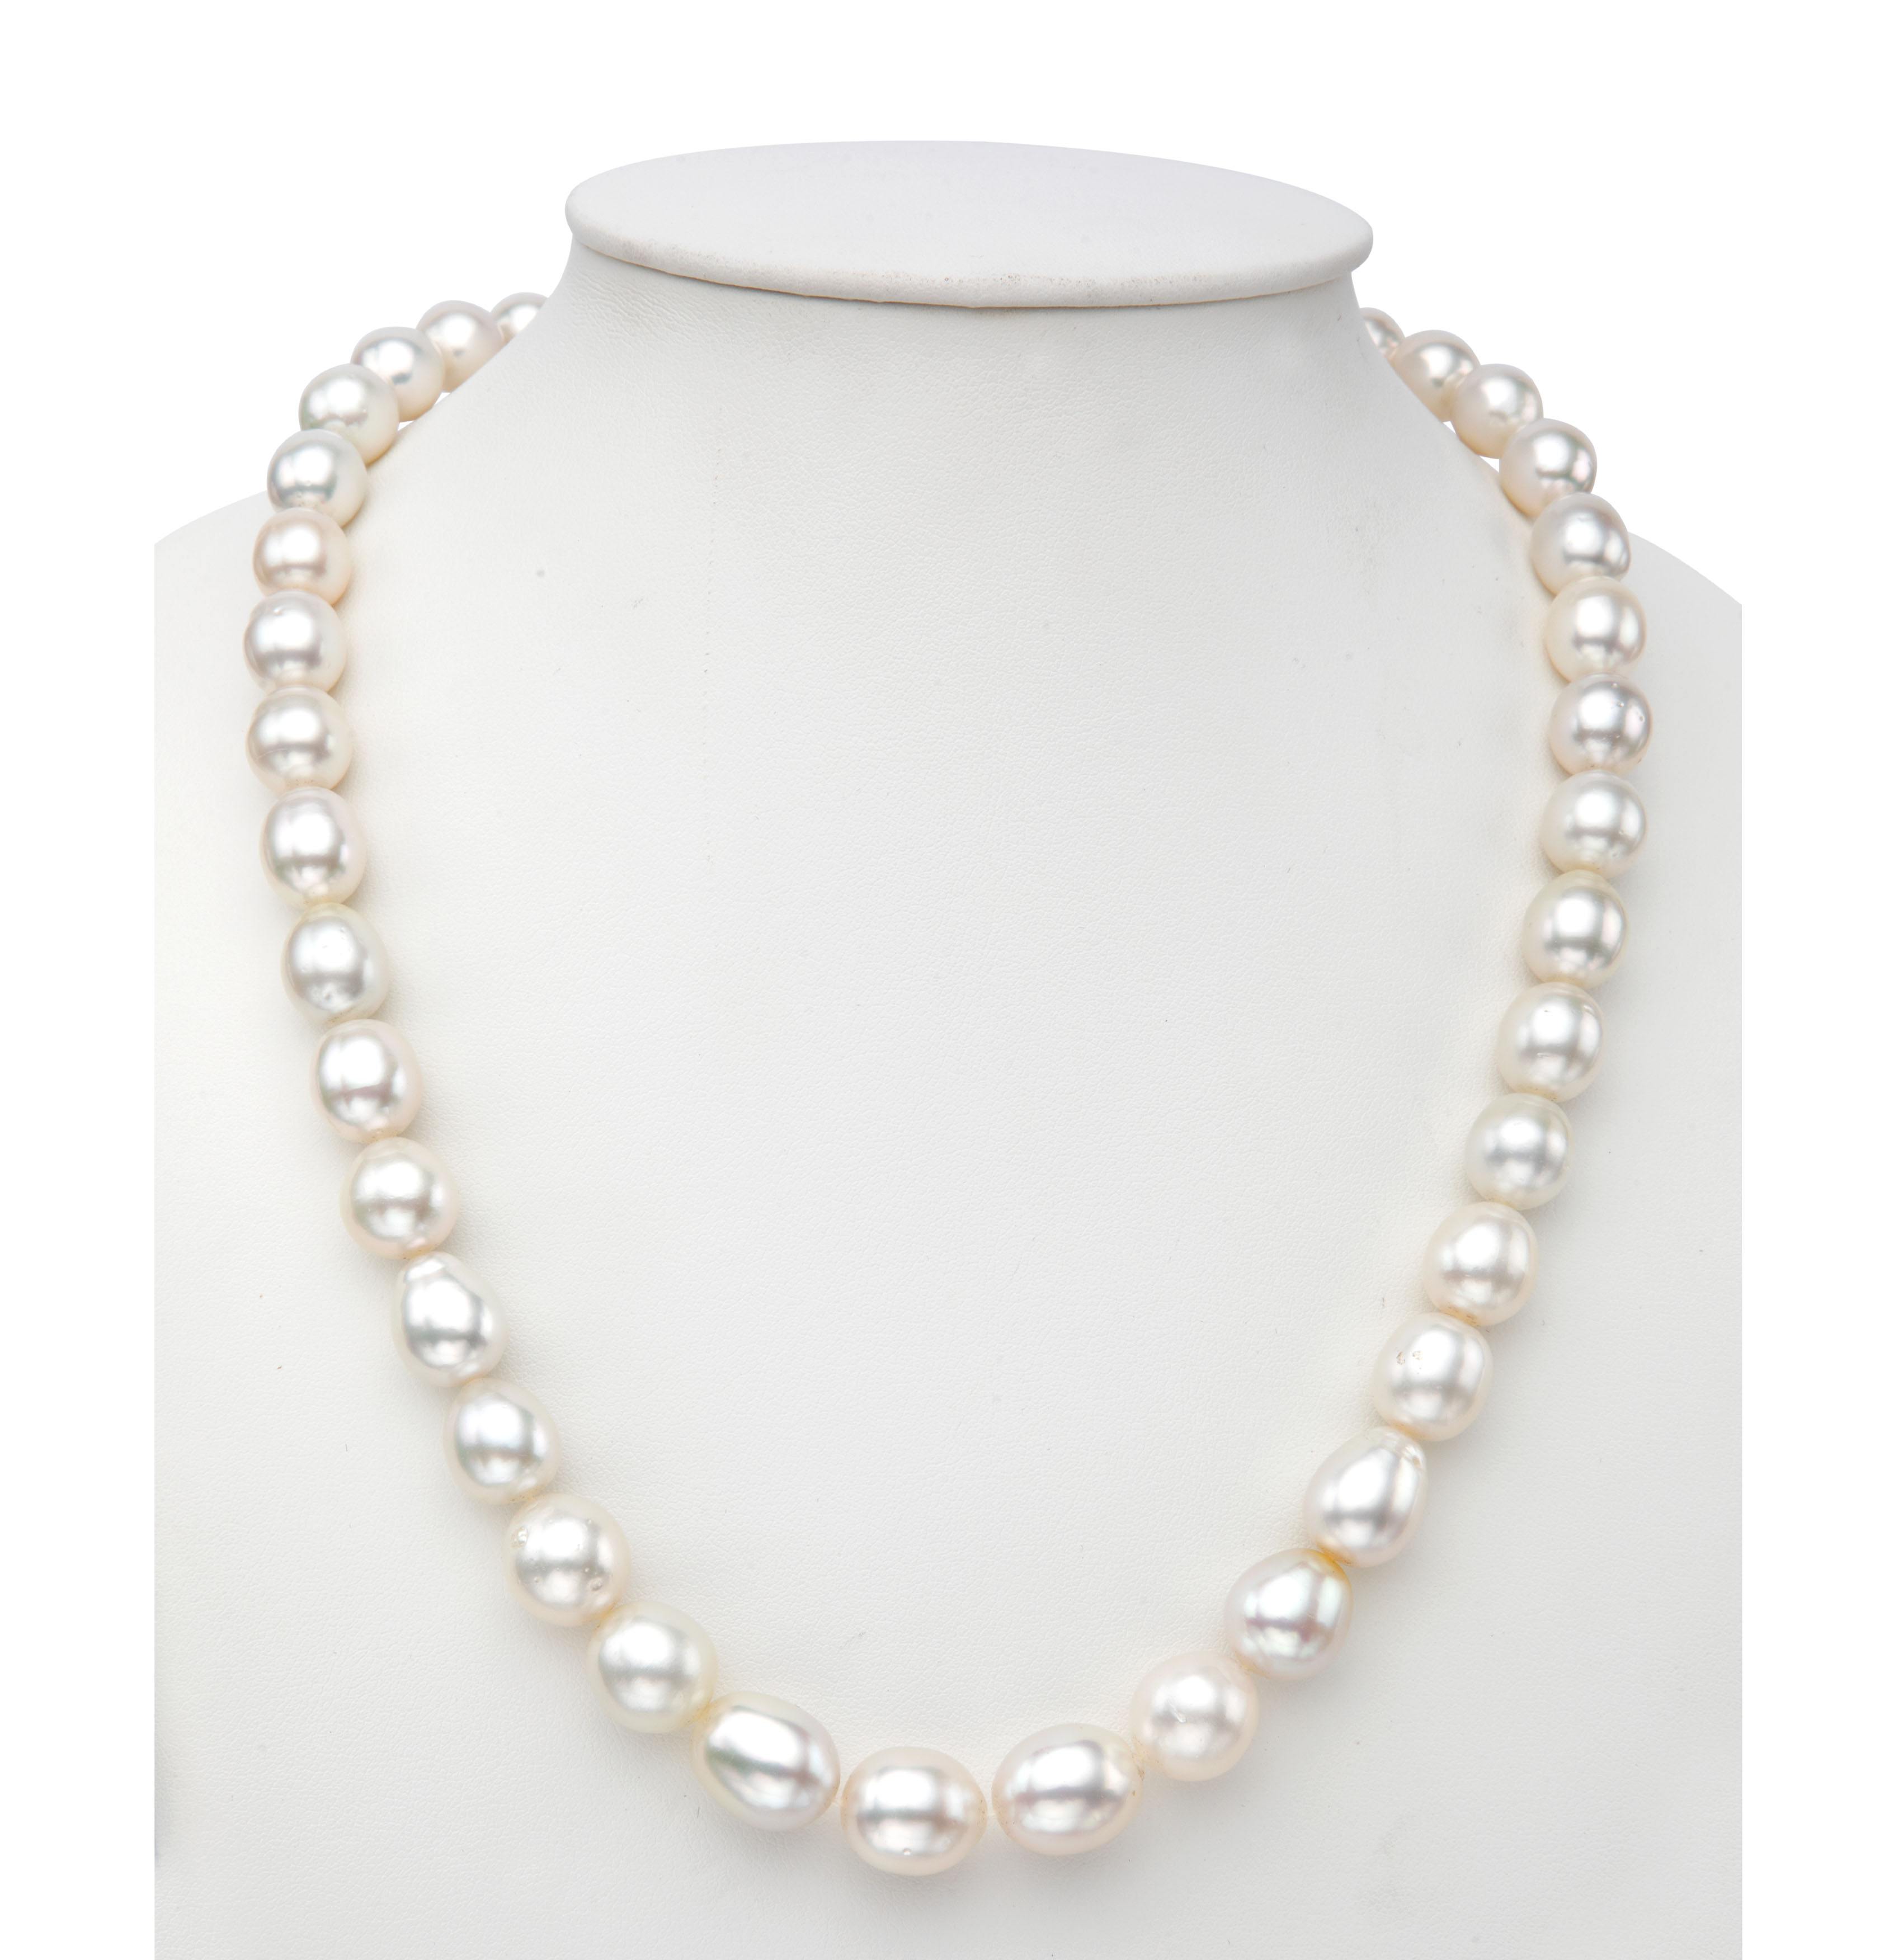 9.0-12.0mm White South Sea Pearls Grading Necklace Set-AAA Quality ...